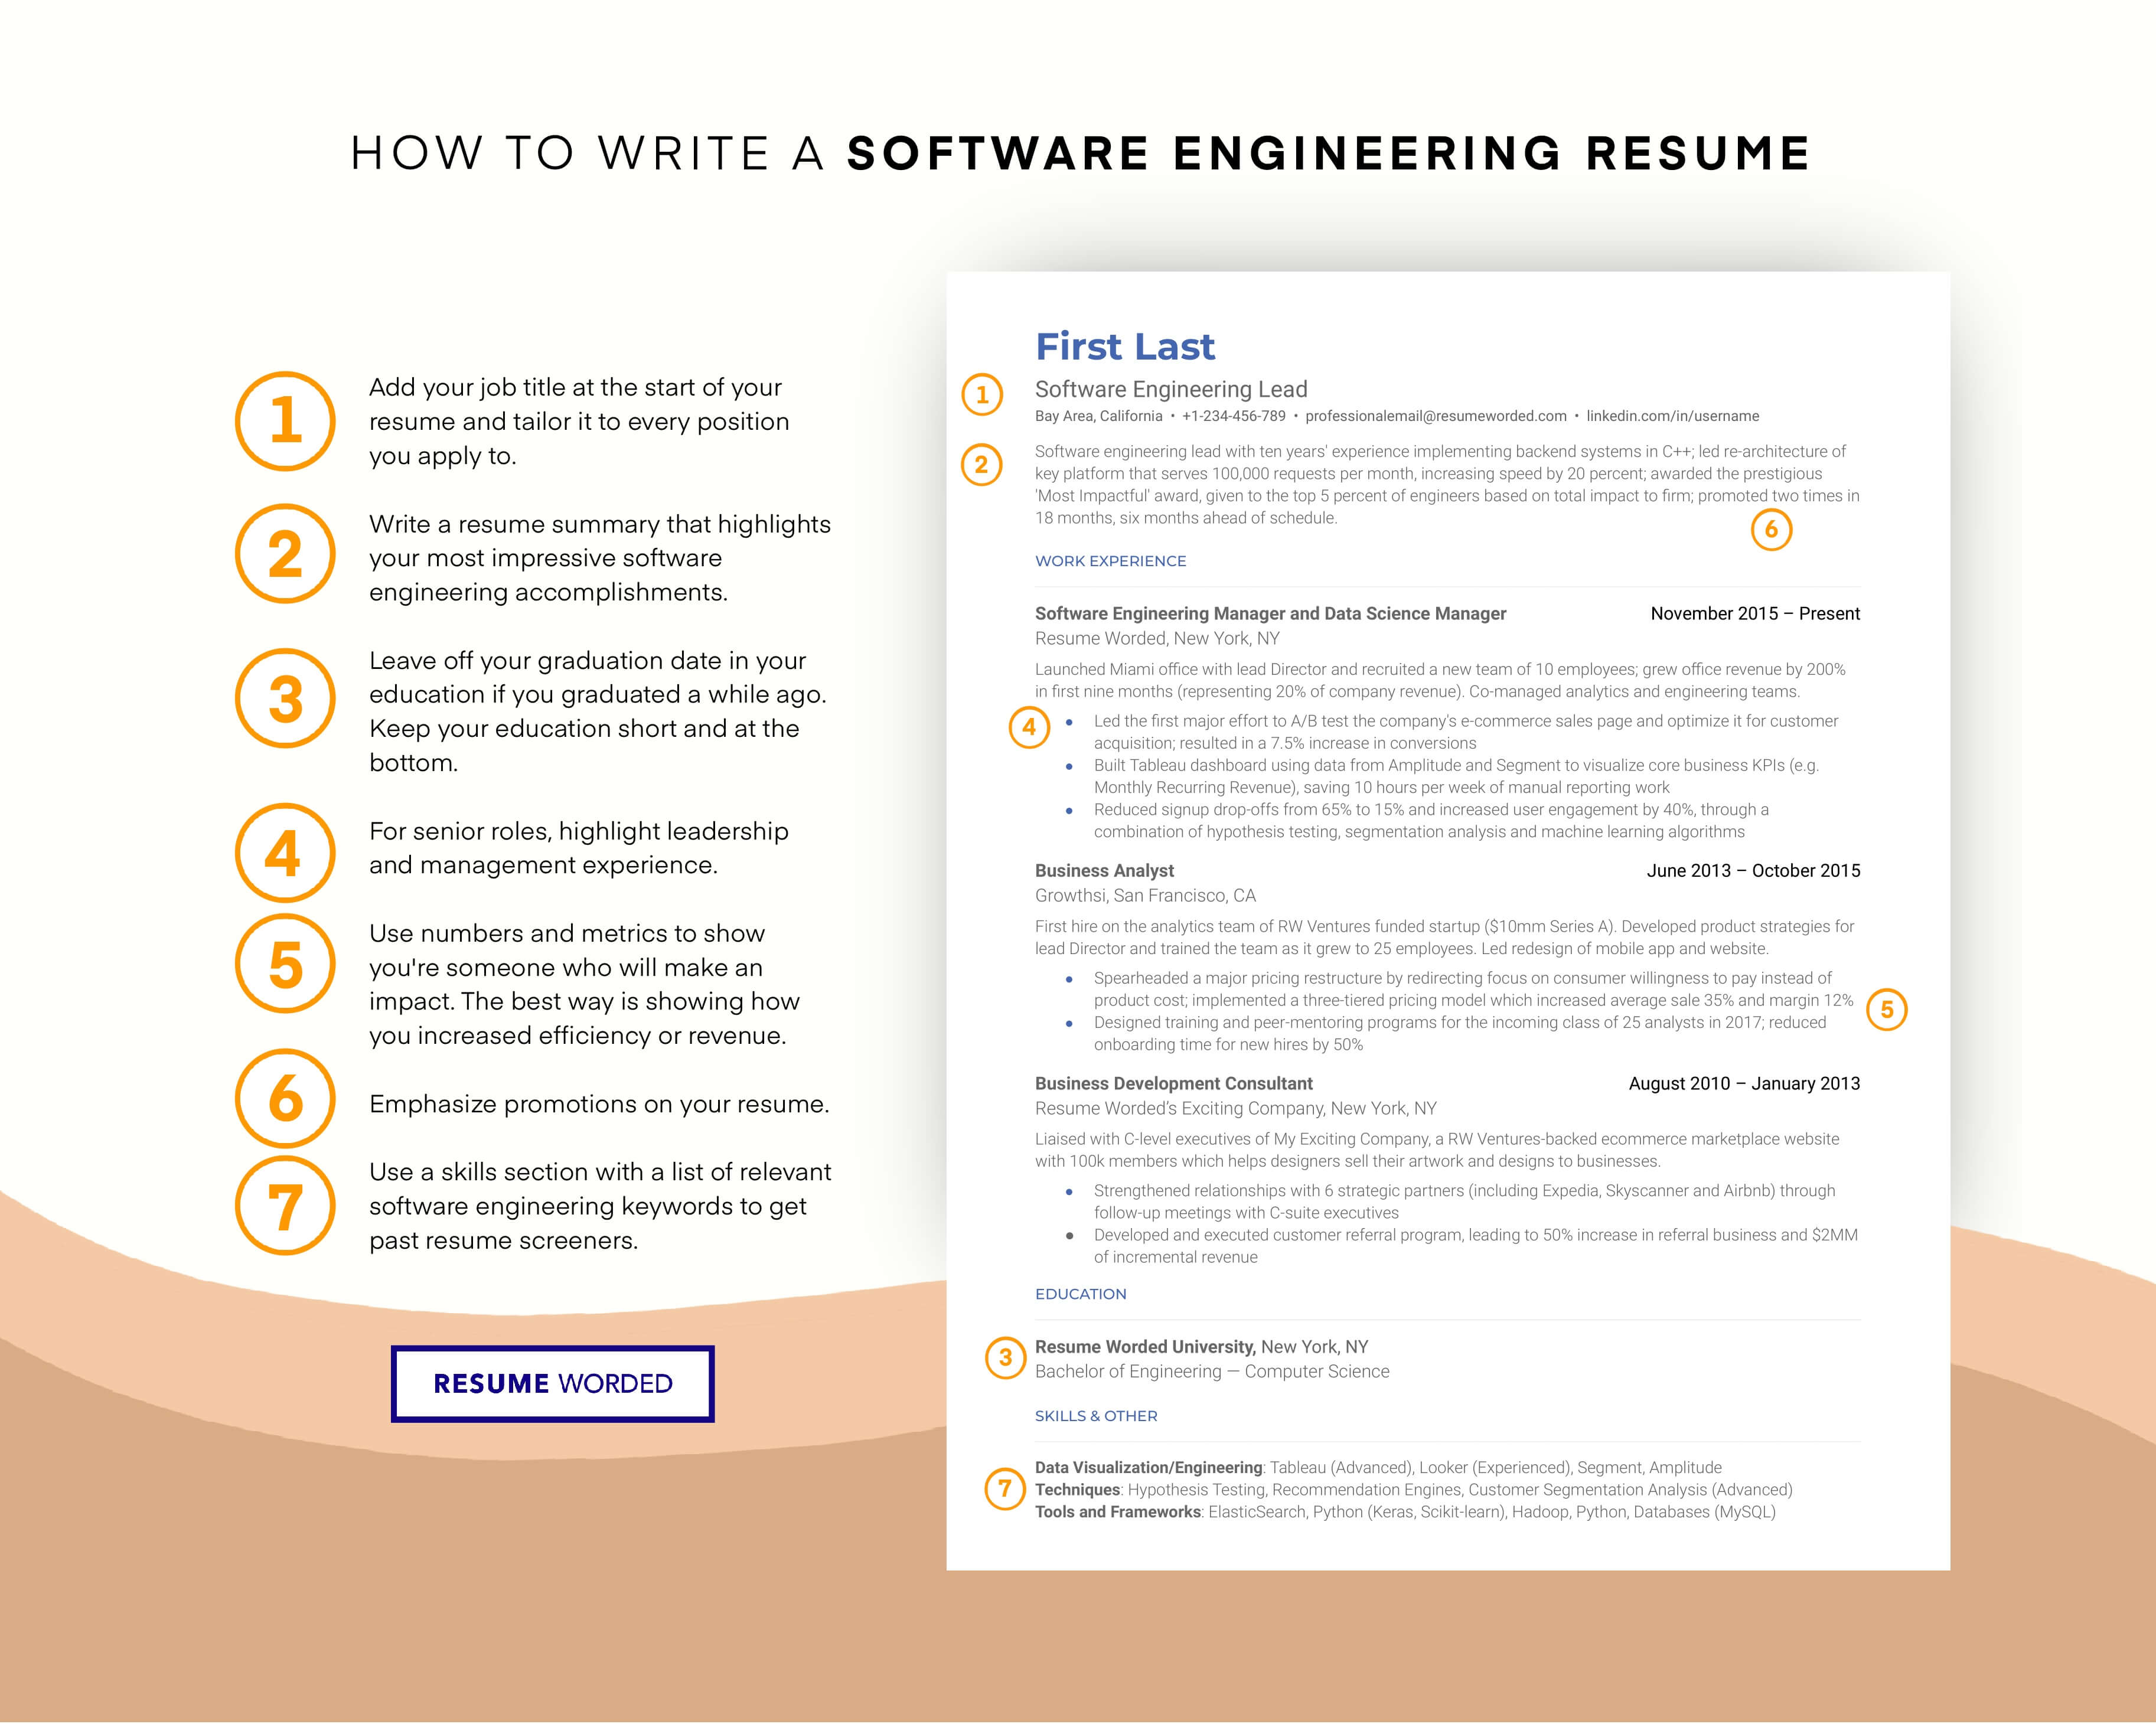 Include software developer experience. - Test Engineer Resume